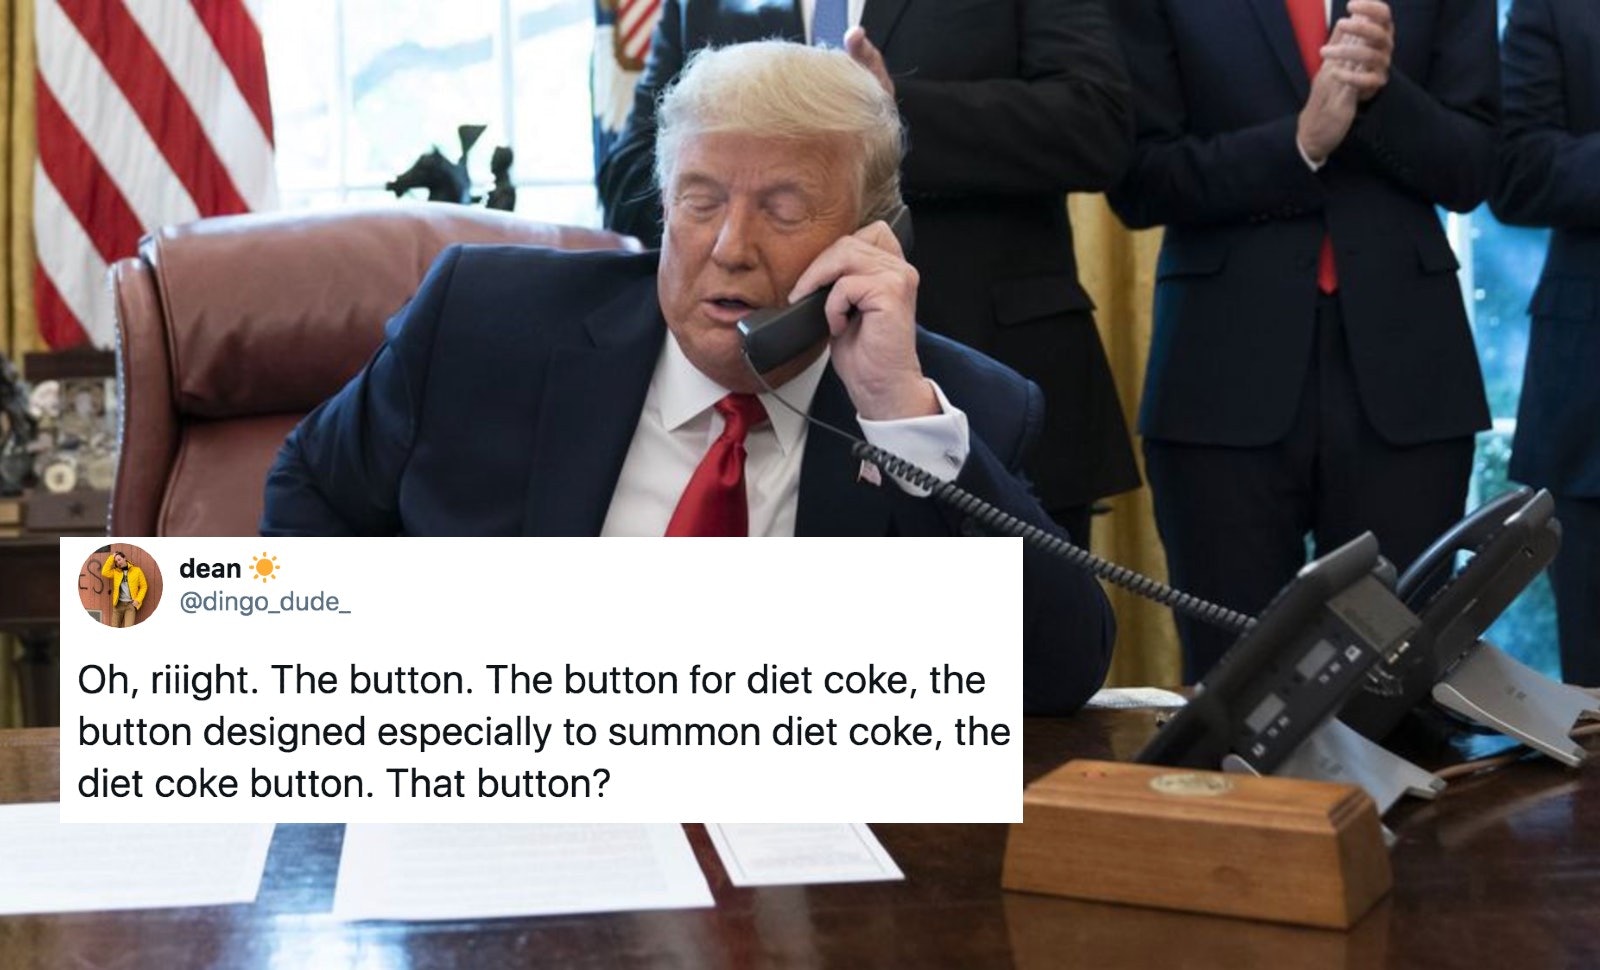 trumps red button that gives him coke